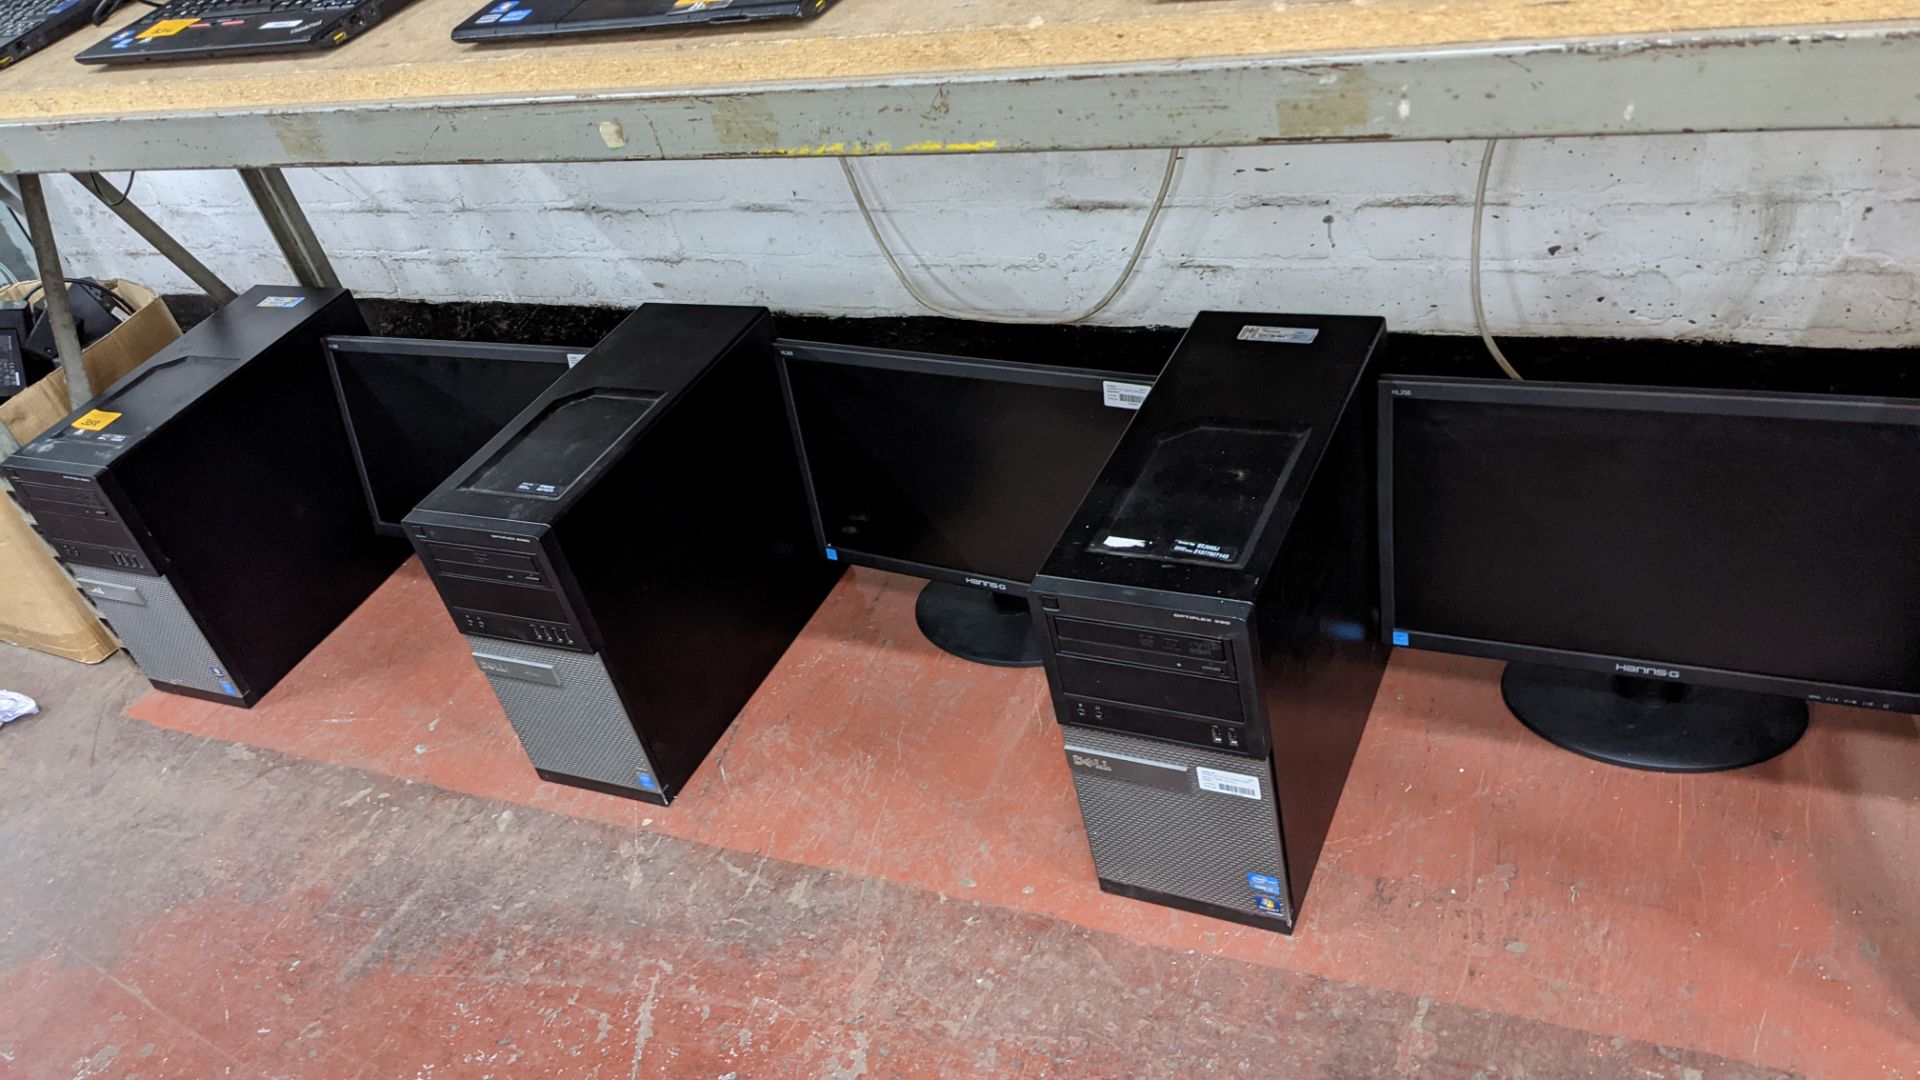 3 off Dell Optiplex assorted tower computers, each with monitor - no cables, keyboards, mice or othe - Image 10 of 10